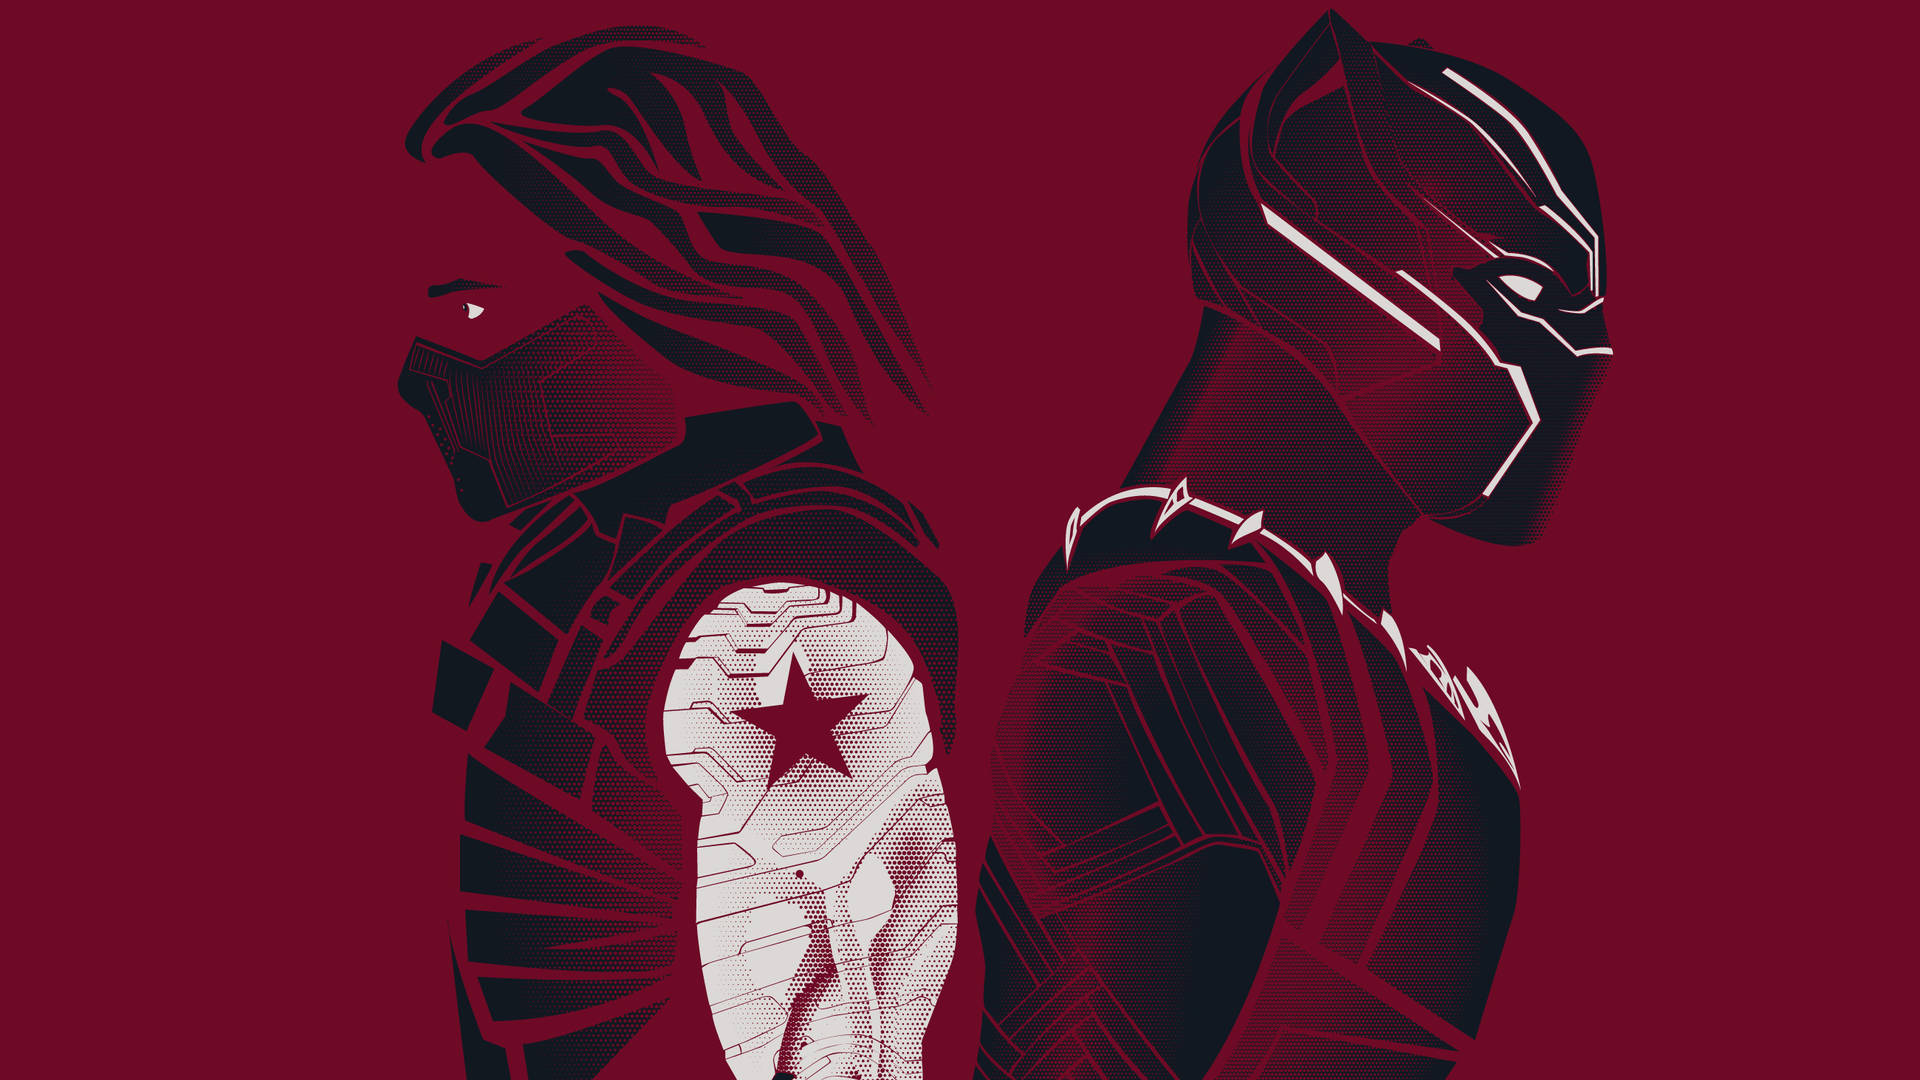 Minimalist Winter Soldier And Black Panther Wallpaper